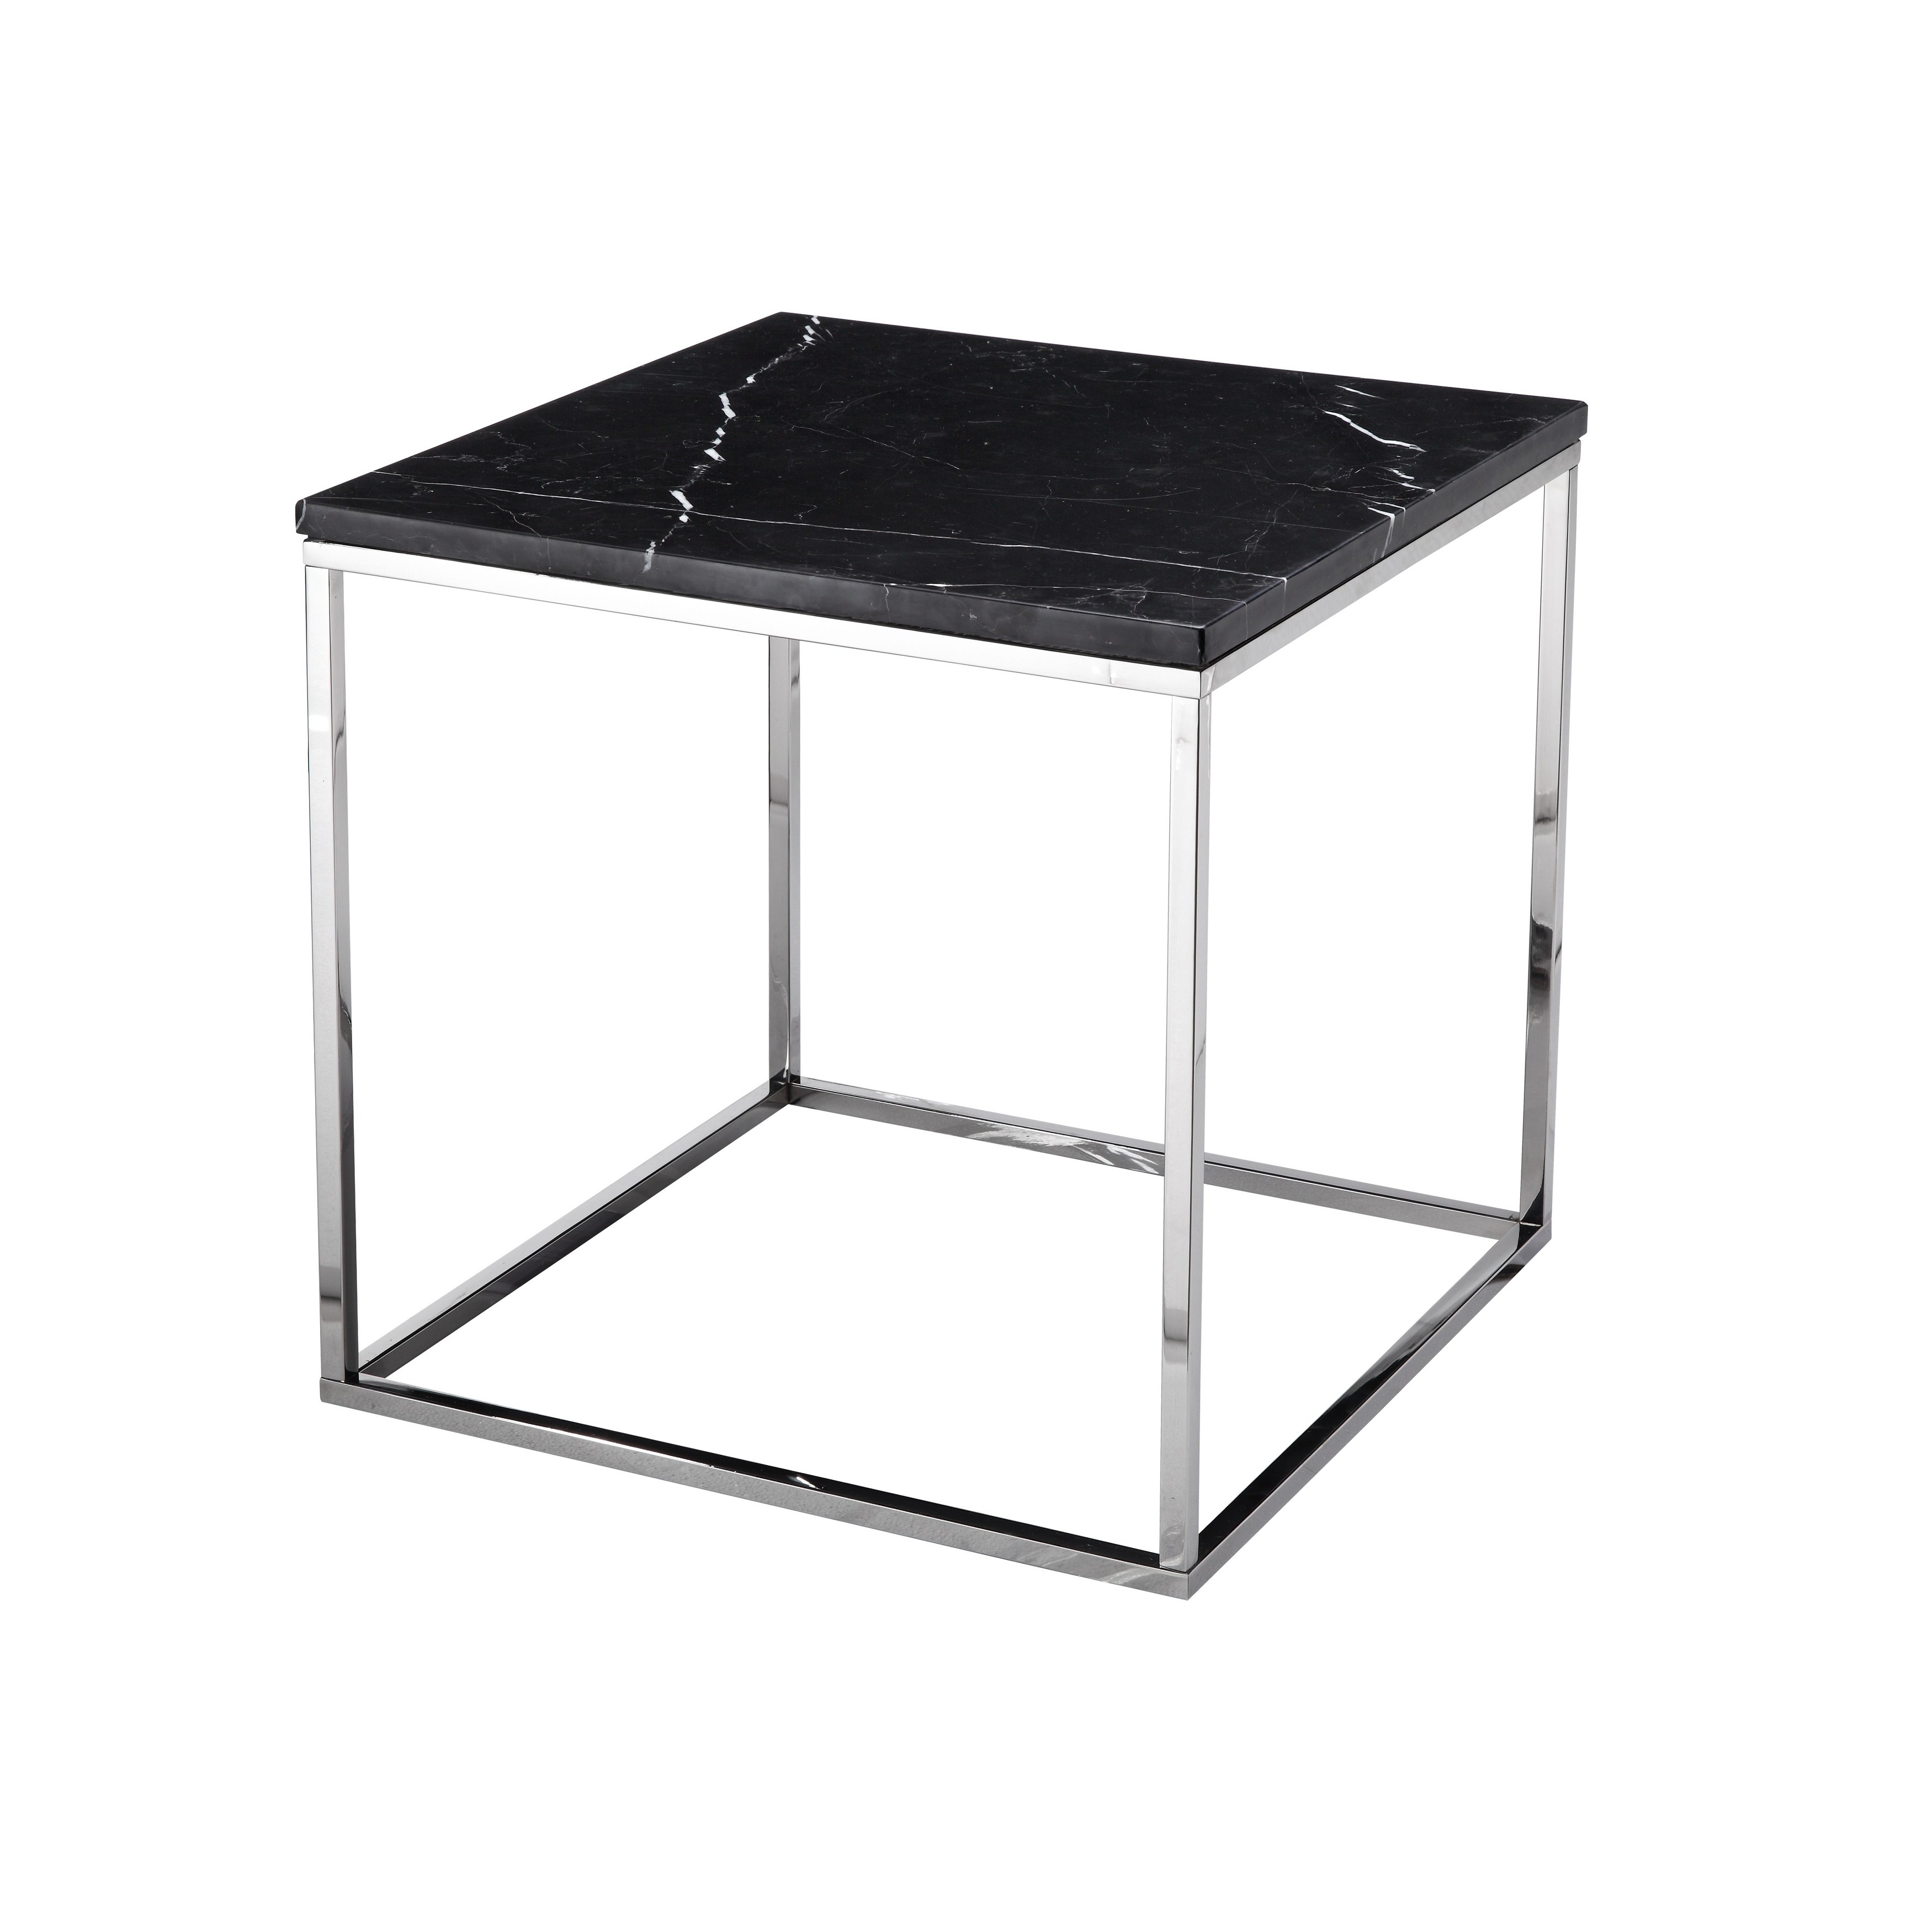 aurelle home italian black marble square accent table free shipping today treasure chest furniture ikea kitchen storage boxes all glass end tables narrow depth console oak wicker